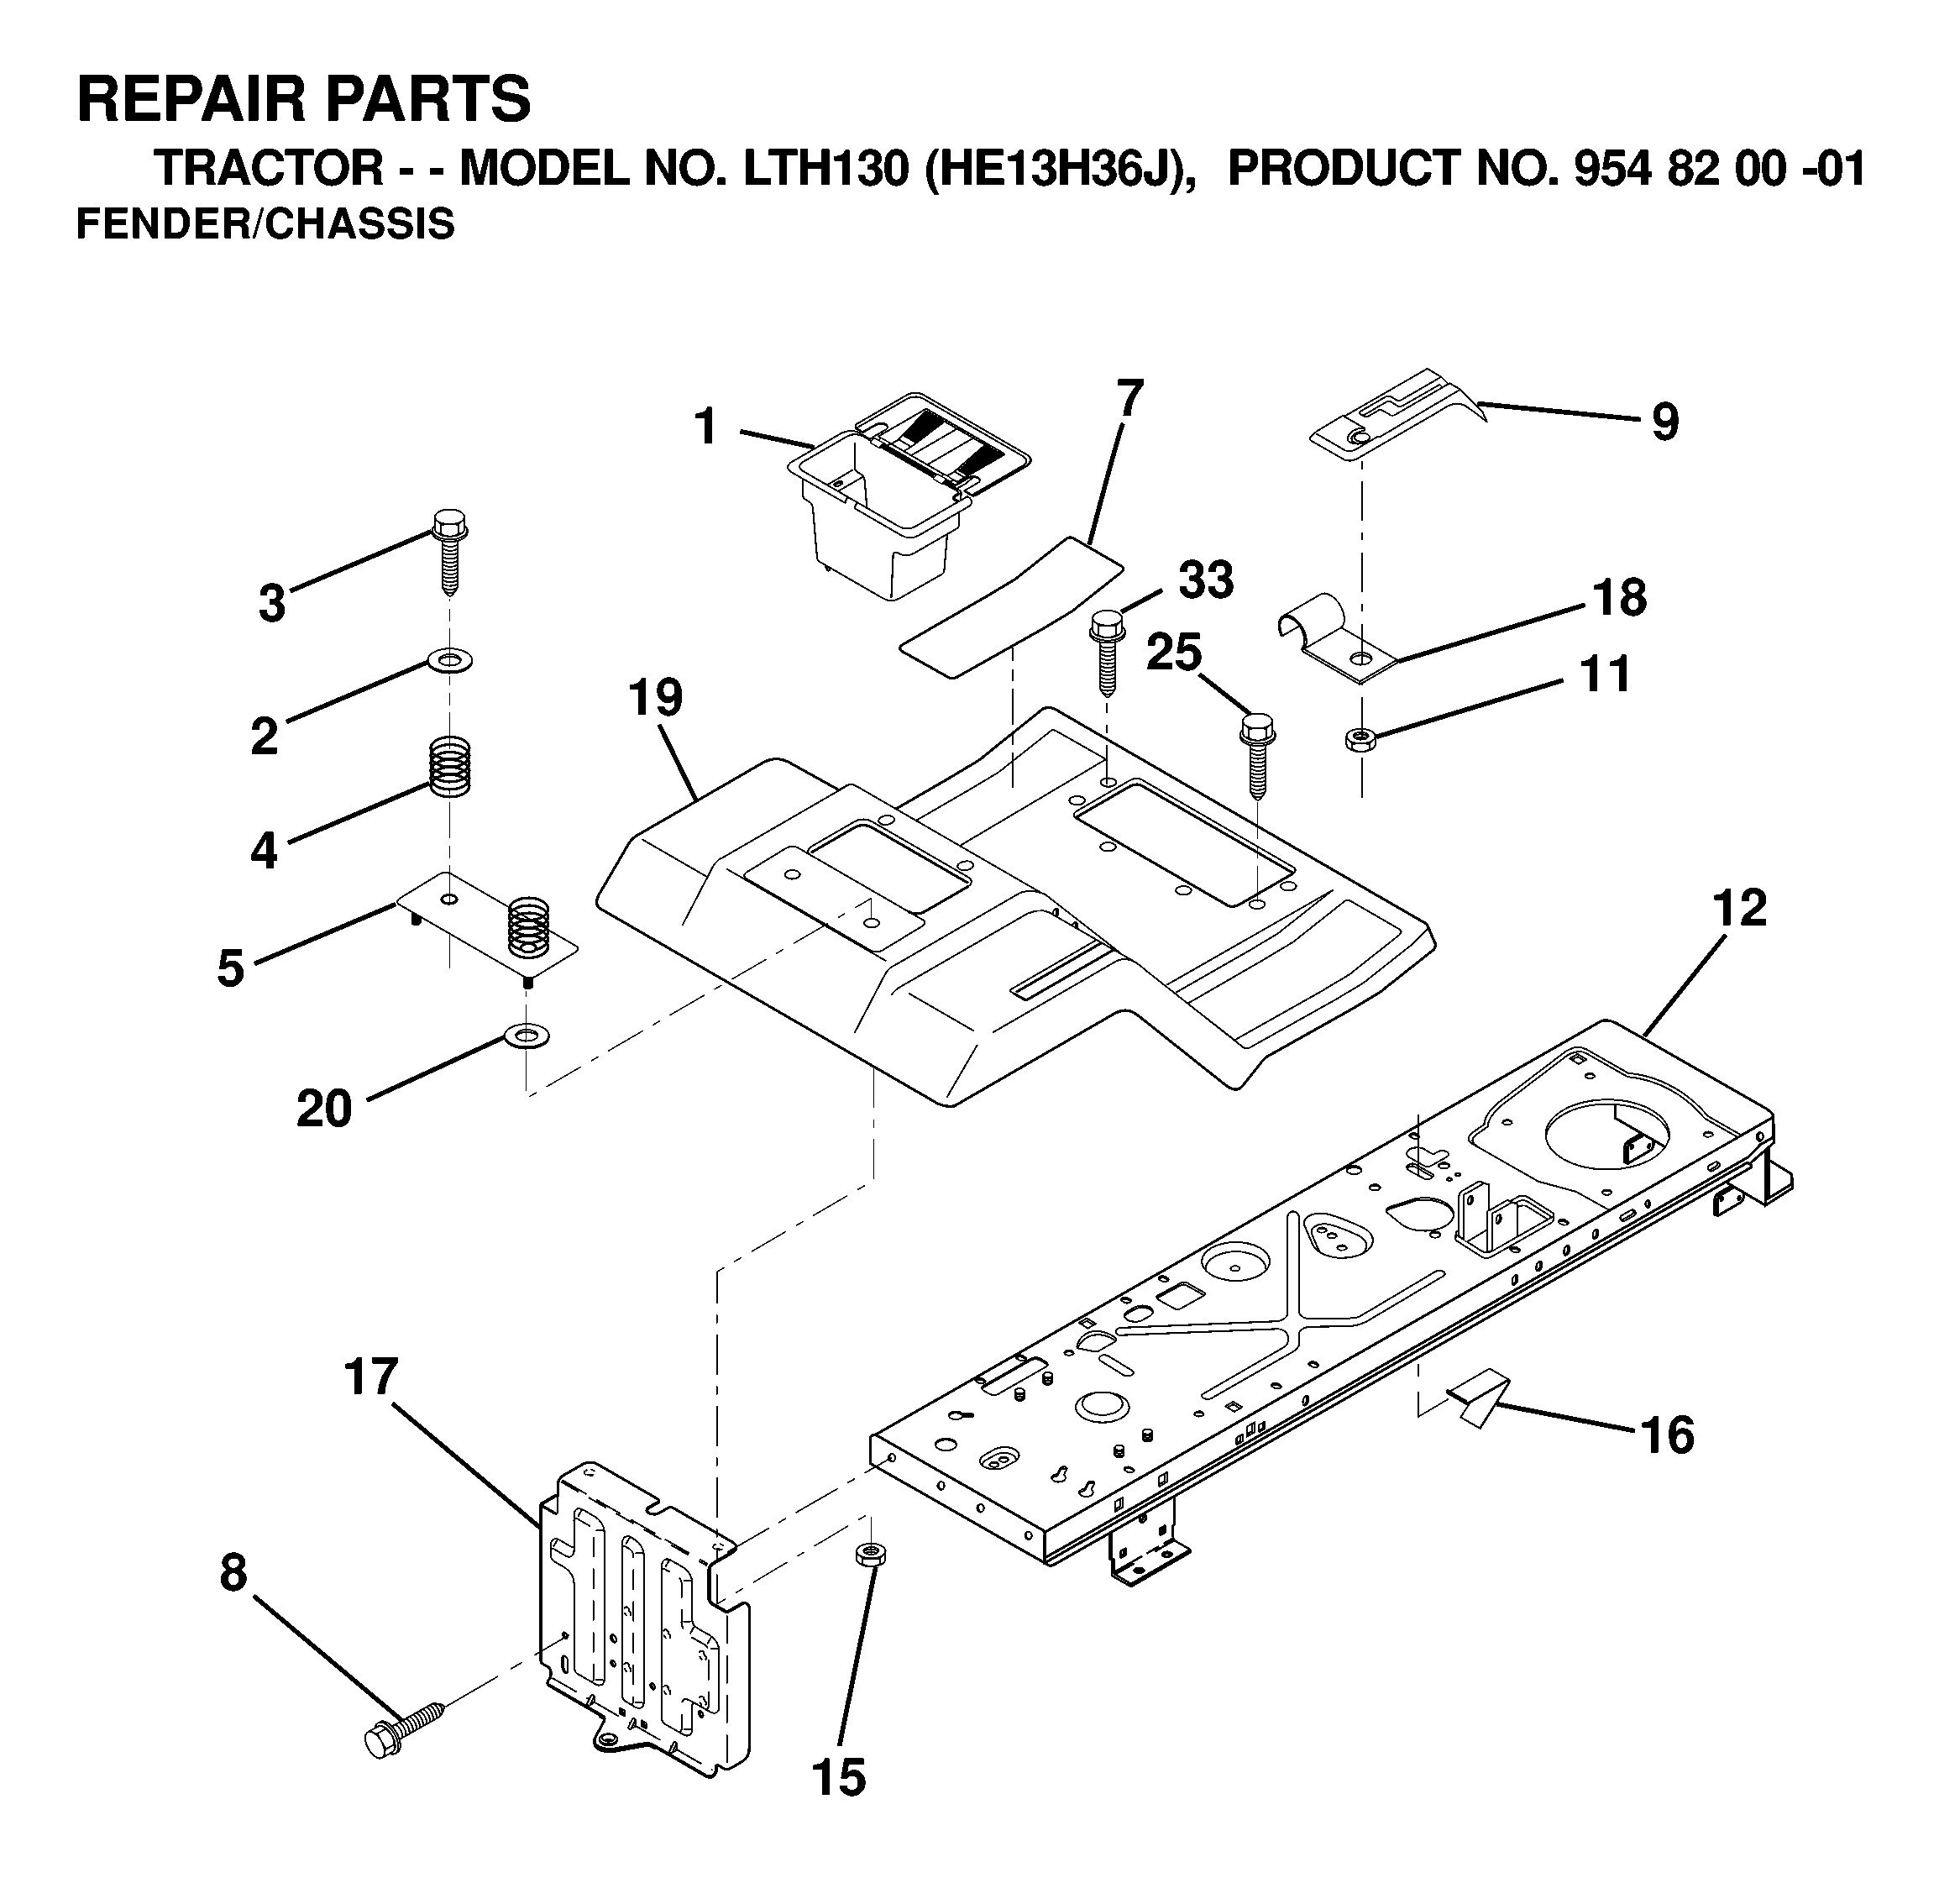 Chassis and appendix 532404349, 734117441, 817490612, 587613301, 532125142, 532134214, 596030701, 532166614, 532124346, 532145190, 873640400, 532146613, 532140782, 532126470, 532141393, 596135301, 817060514, 817190516